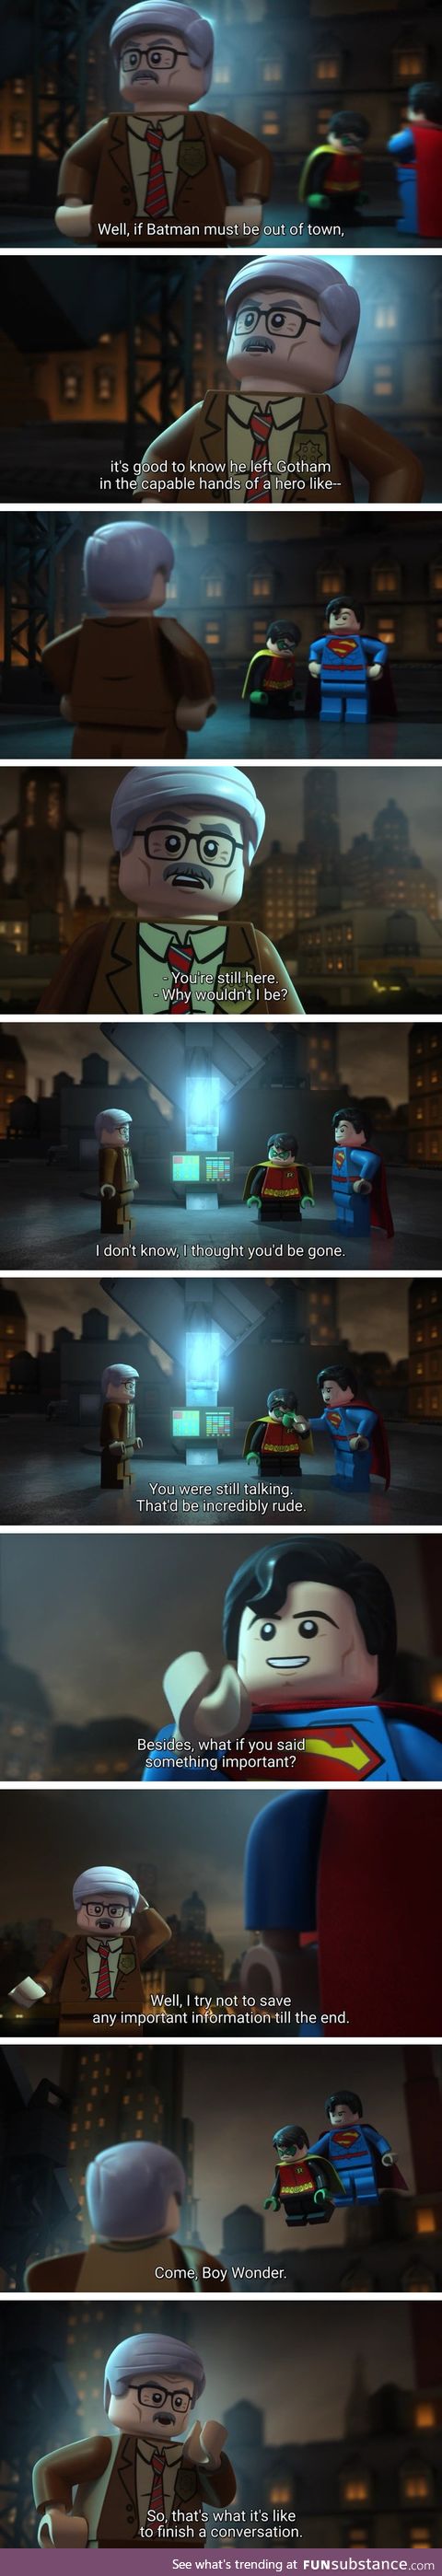 Supes is polite